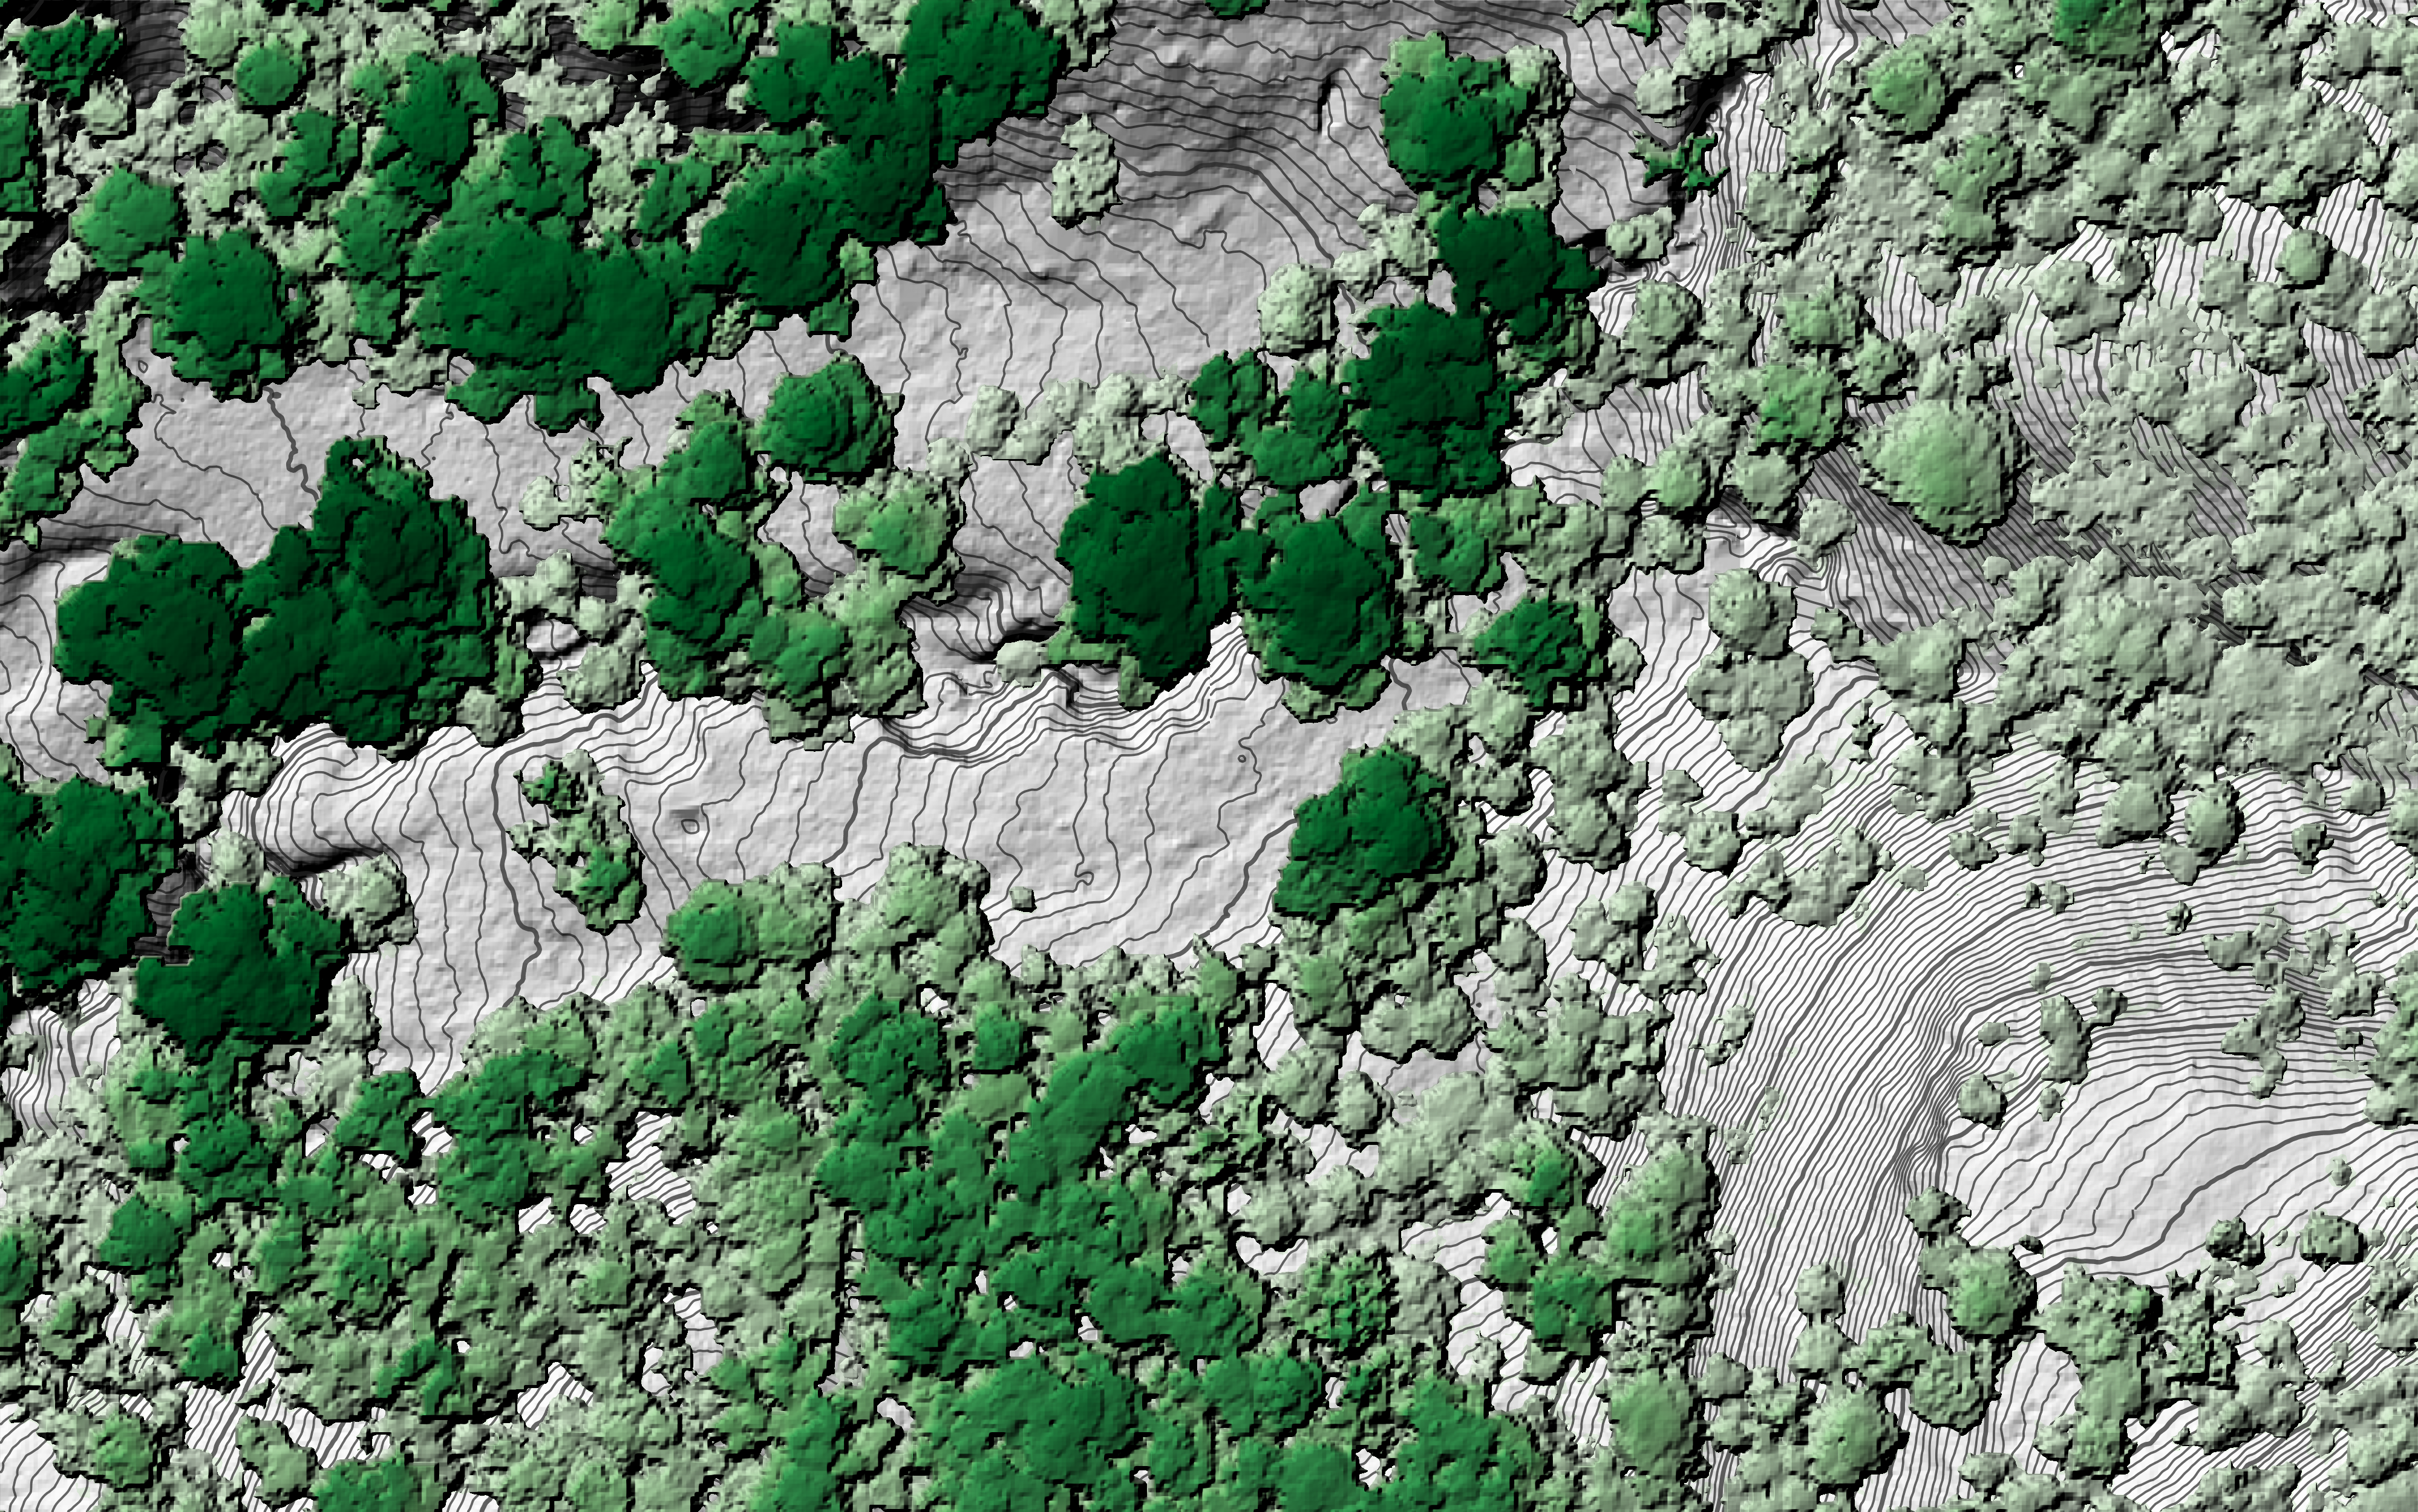 Canopy coverage is visualised in different shades of green to indicate canopy height of trees dotted across the image. The contours of the ground underneath are shaded in grey with lines drawn on the side of slopes representing the contours and height of the land.